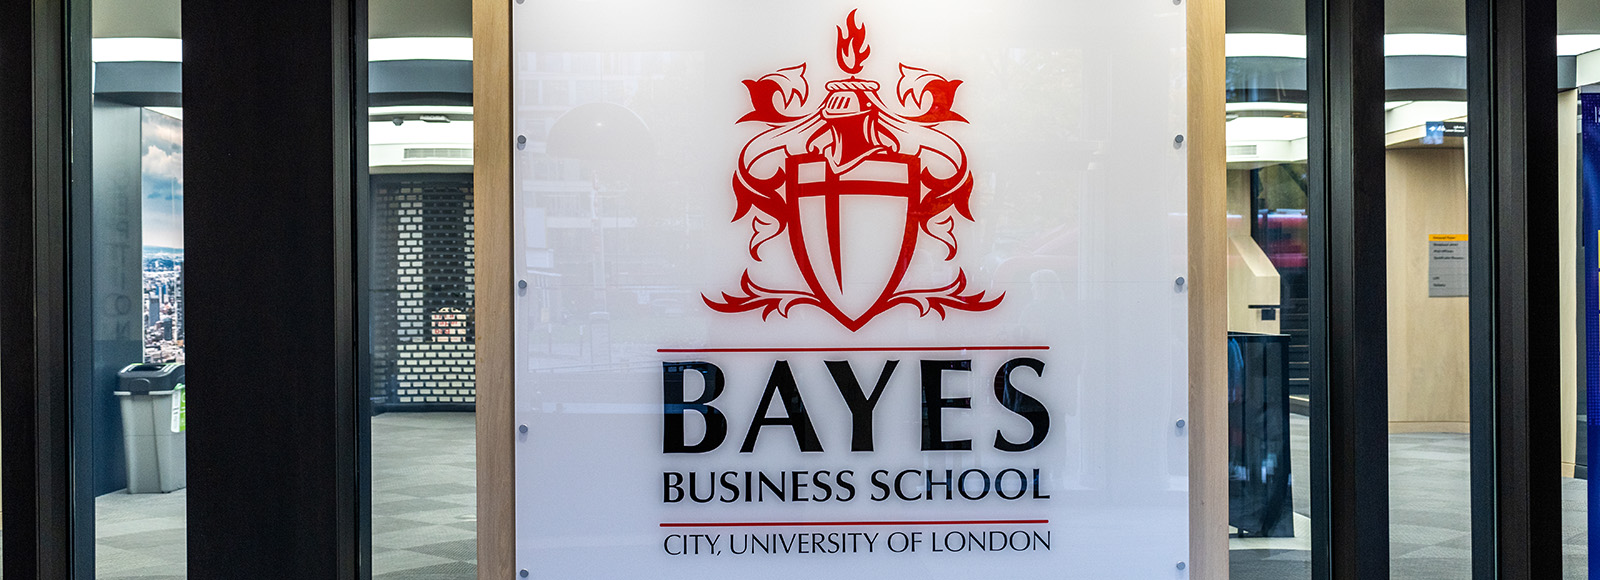 Bayes Business School logo on entrance of Bunhill Row